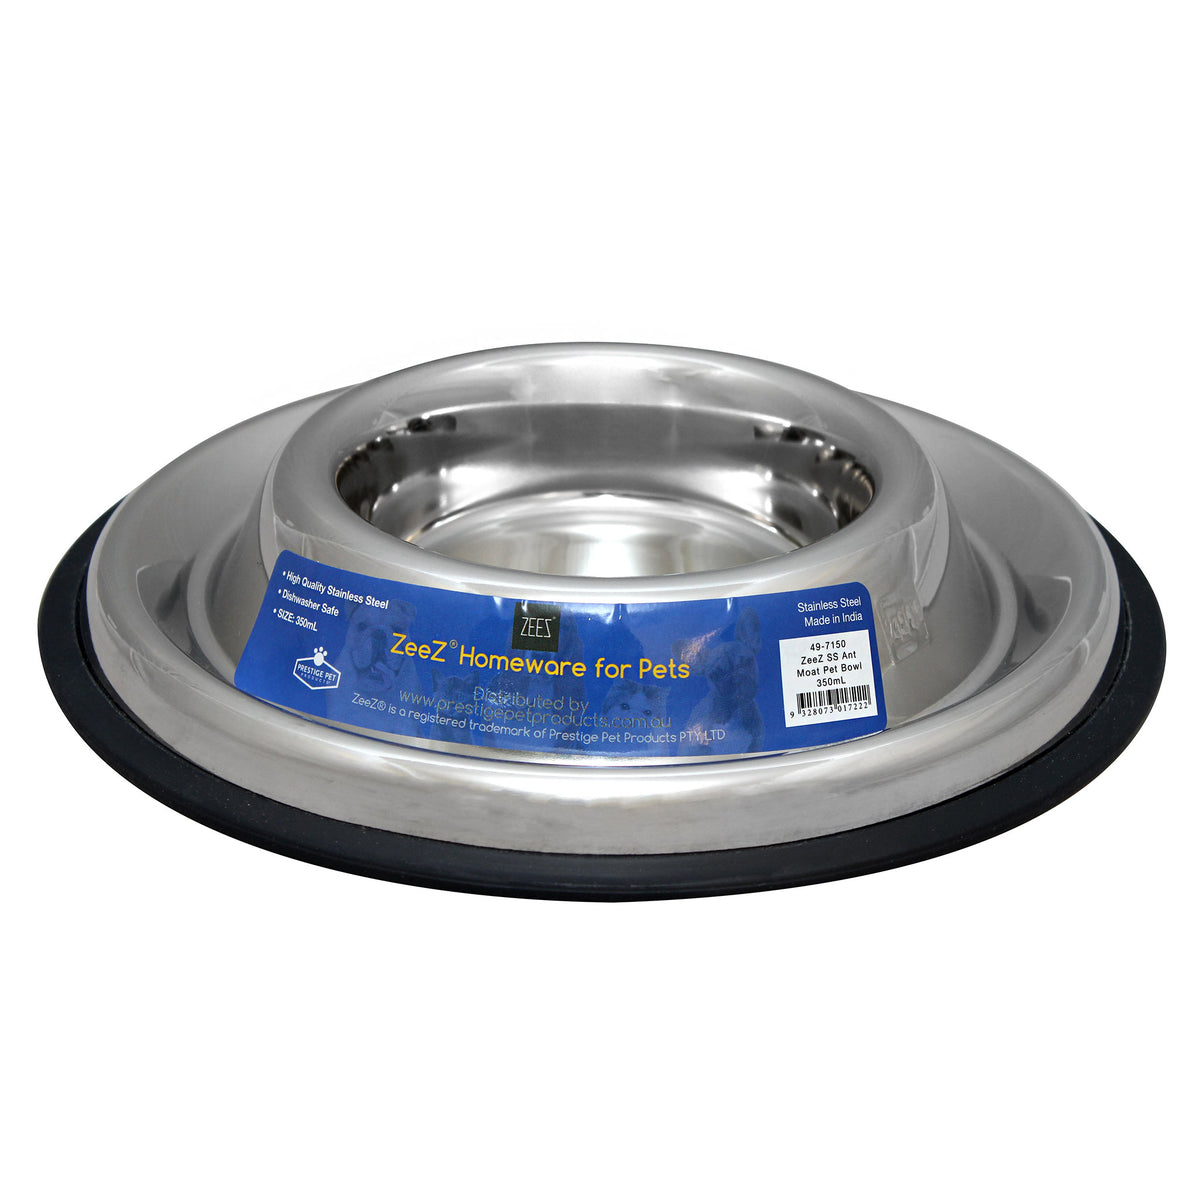 Ant Moat Stainless Steel Pet Bowl